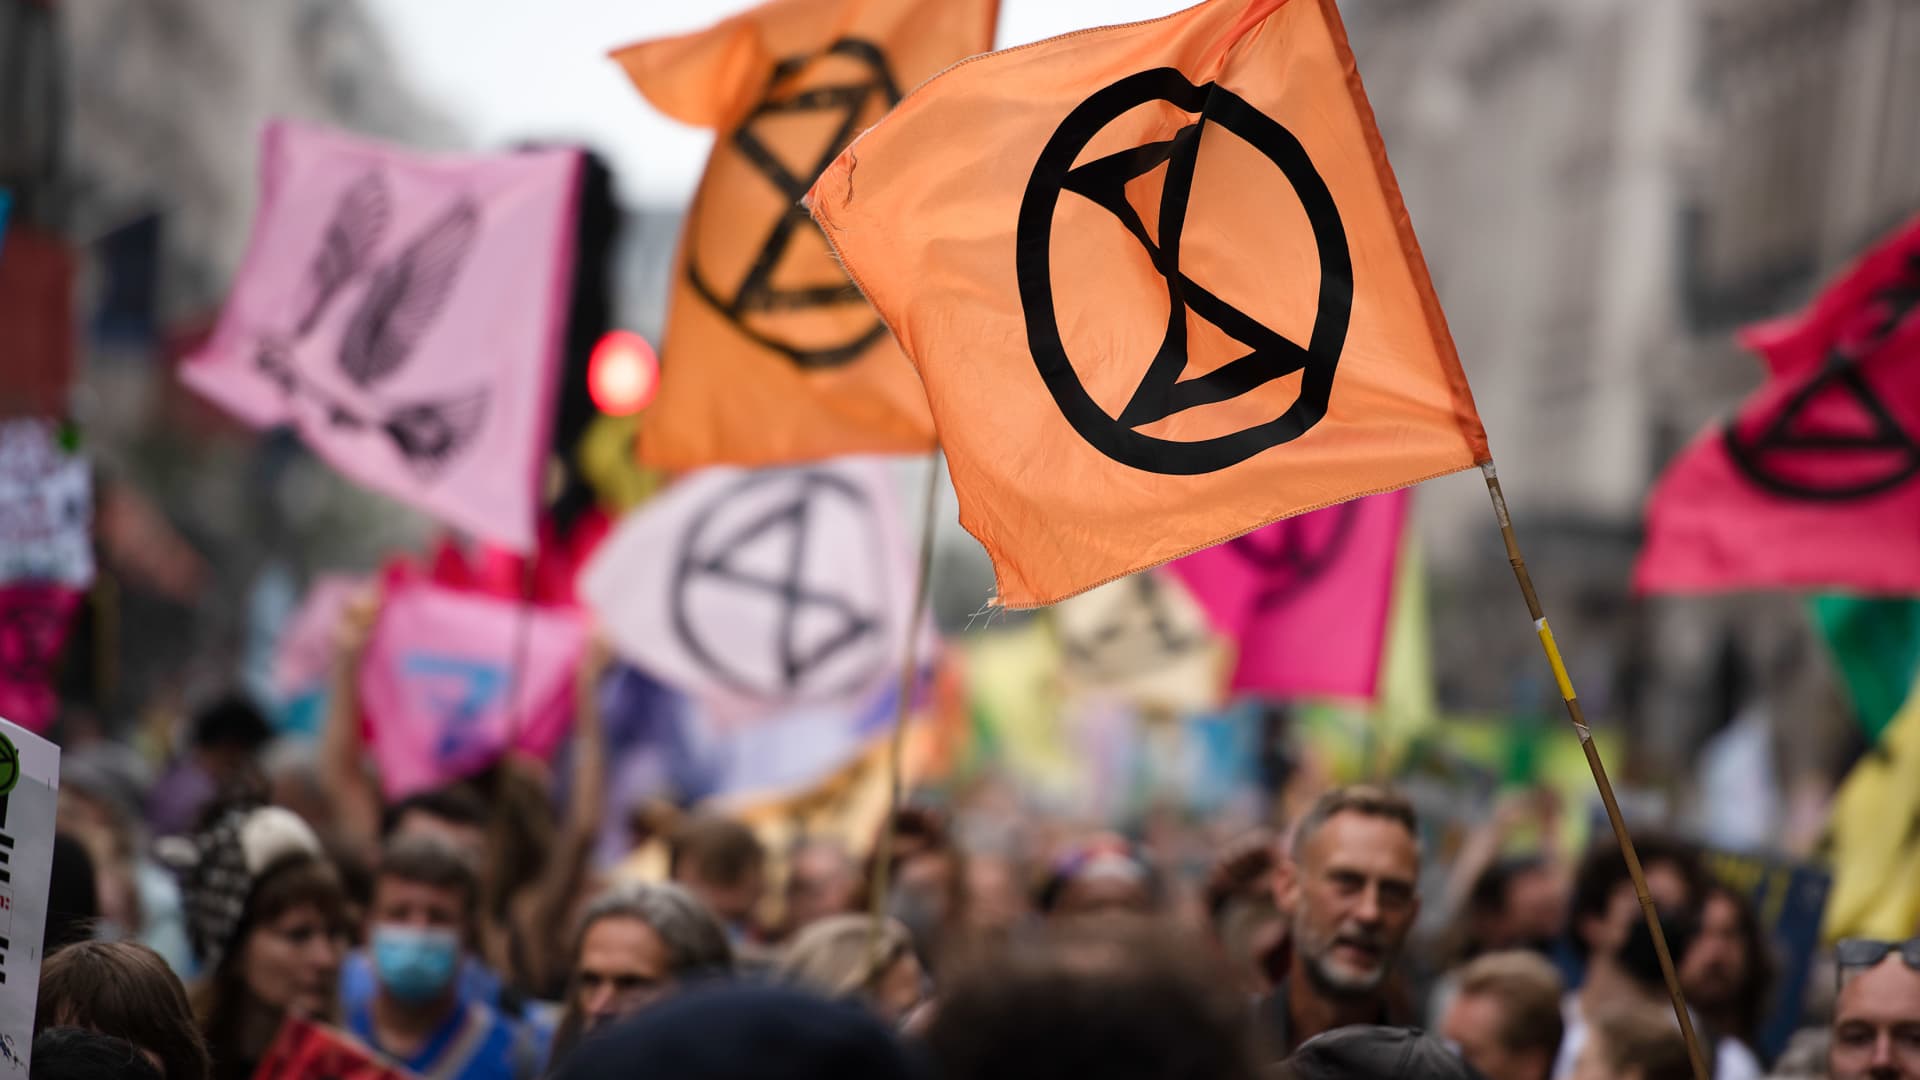 Activists march with flags and placards, during the march at Extinction Rebellion's Nature Protest held in Central London about how nature is in crisis.